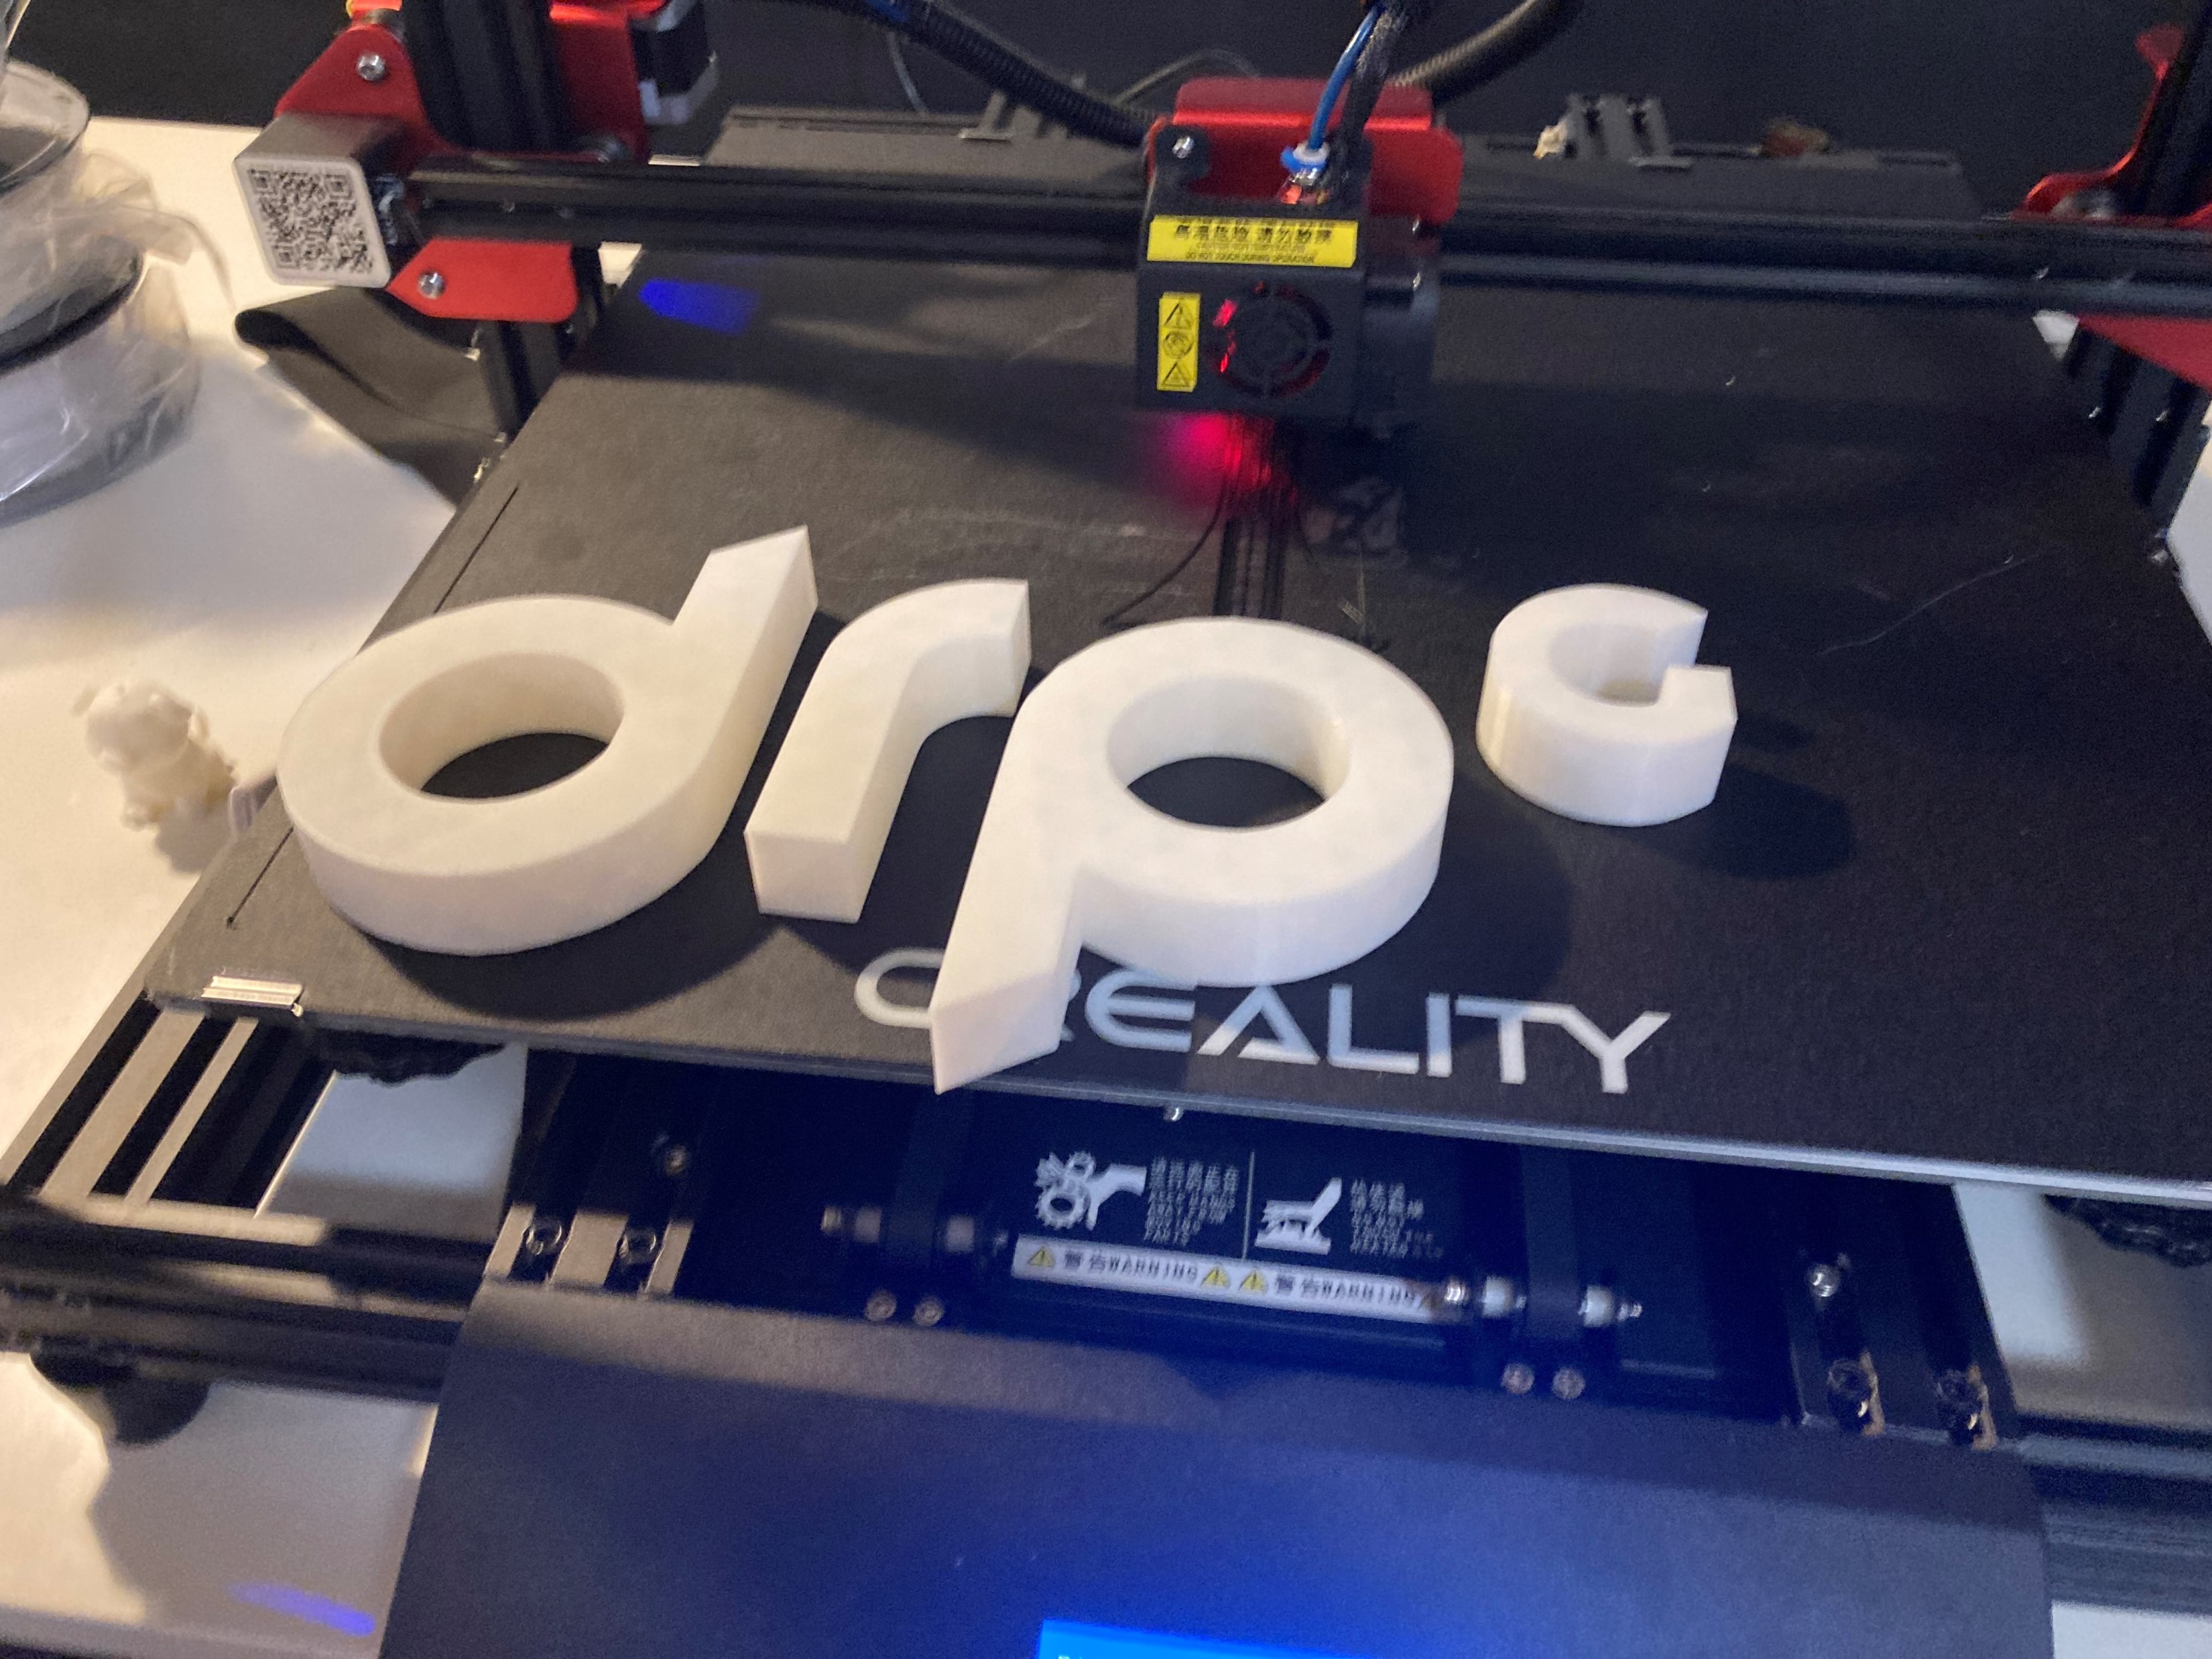 Shot of the DRPG being 3D printed